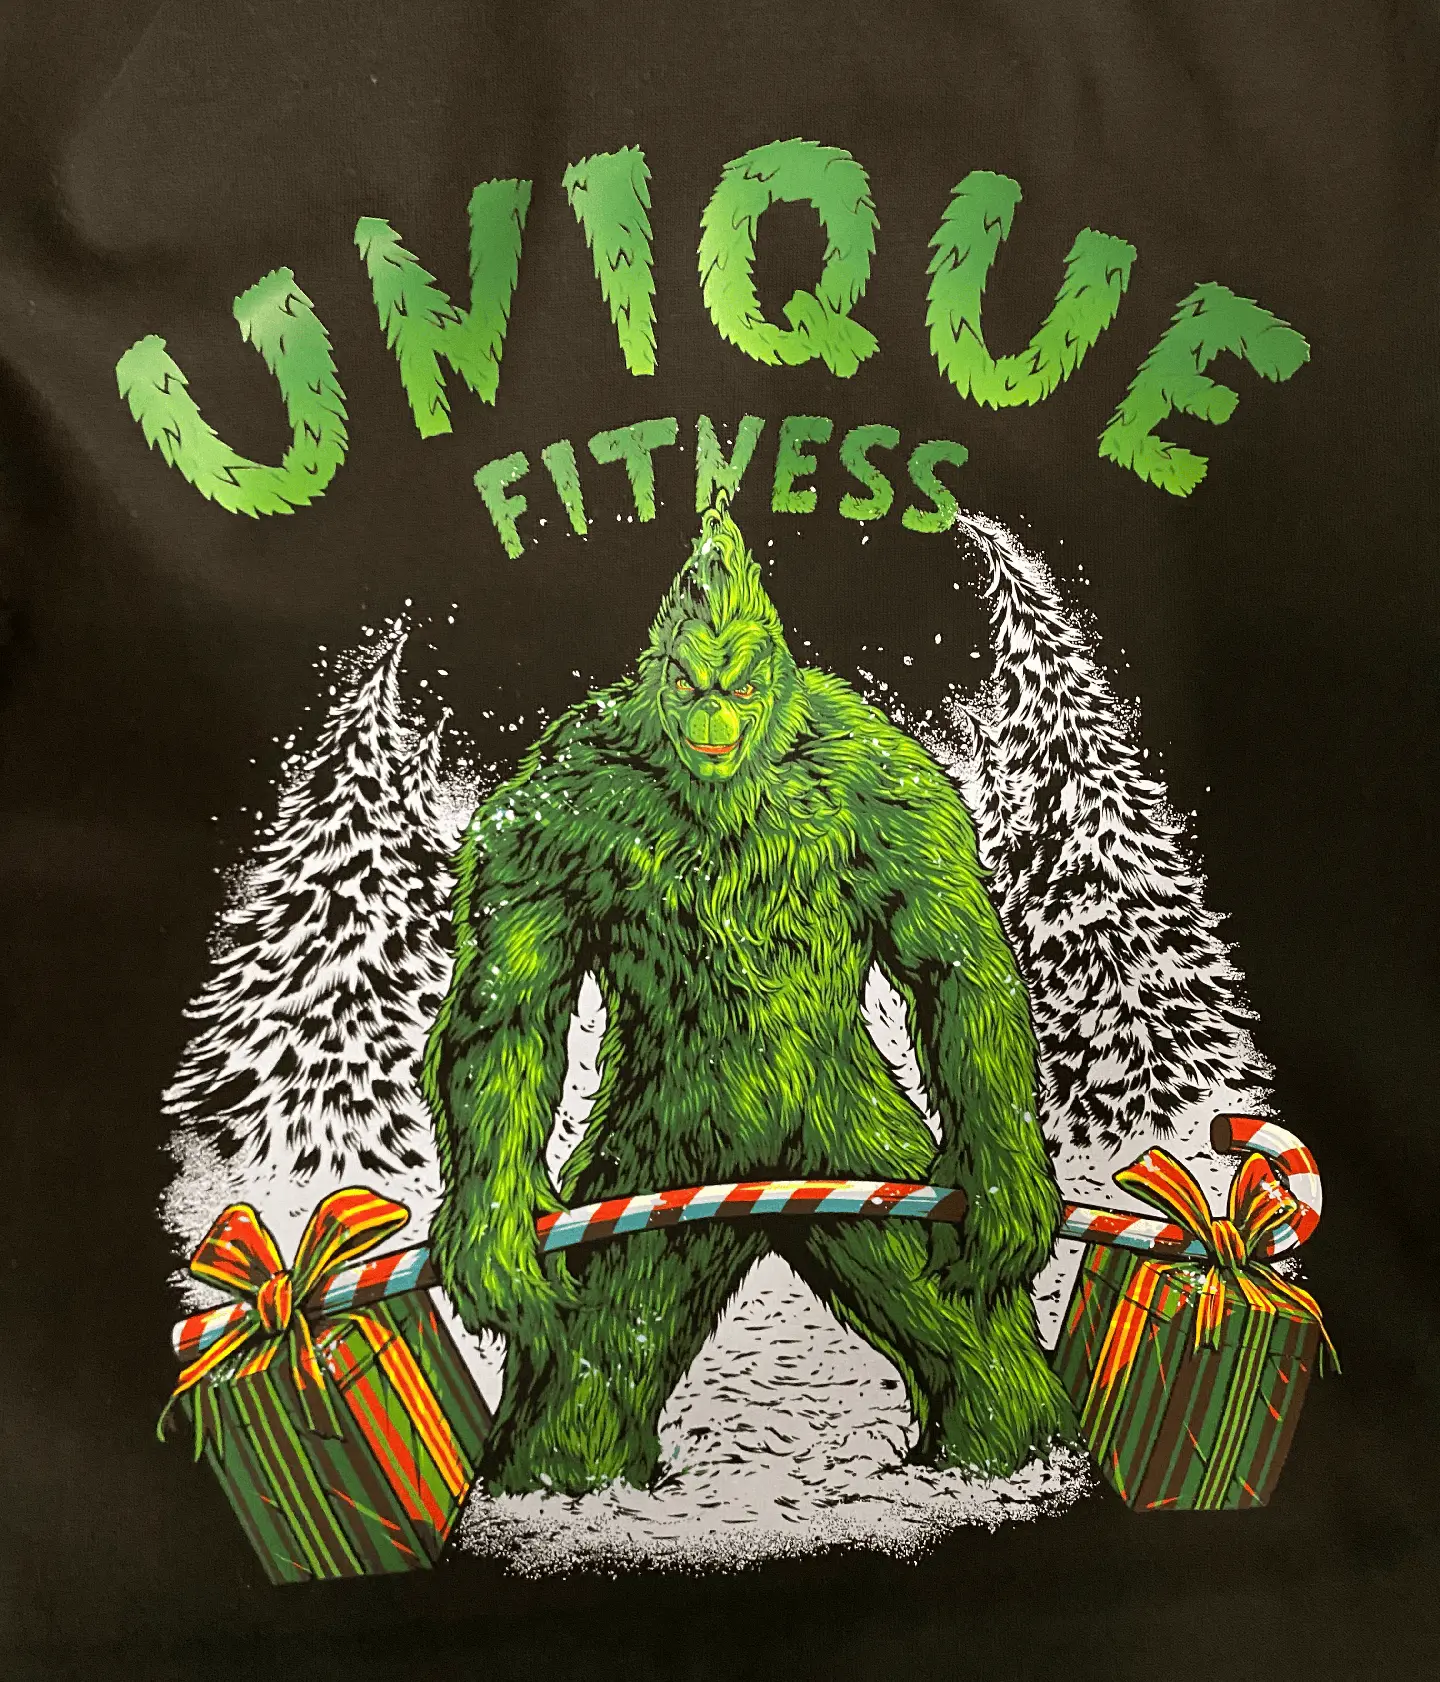 A vibrant and whimsical Unique Fitness holiday-themed shirt design featuring a green Bigfoot character in a snowy landscape, holding a candy cane and surrounded by gift boxes. This eye-catching graphic illustrates the brand's fun and unique approach to fitness and community engagement.